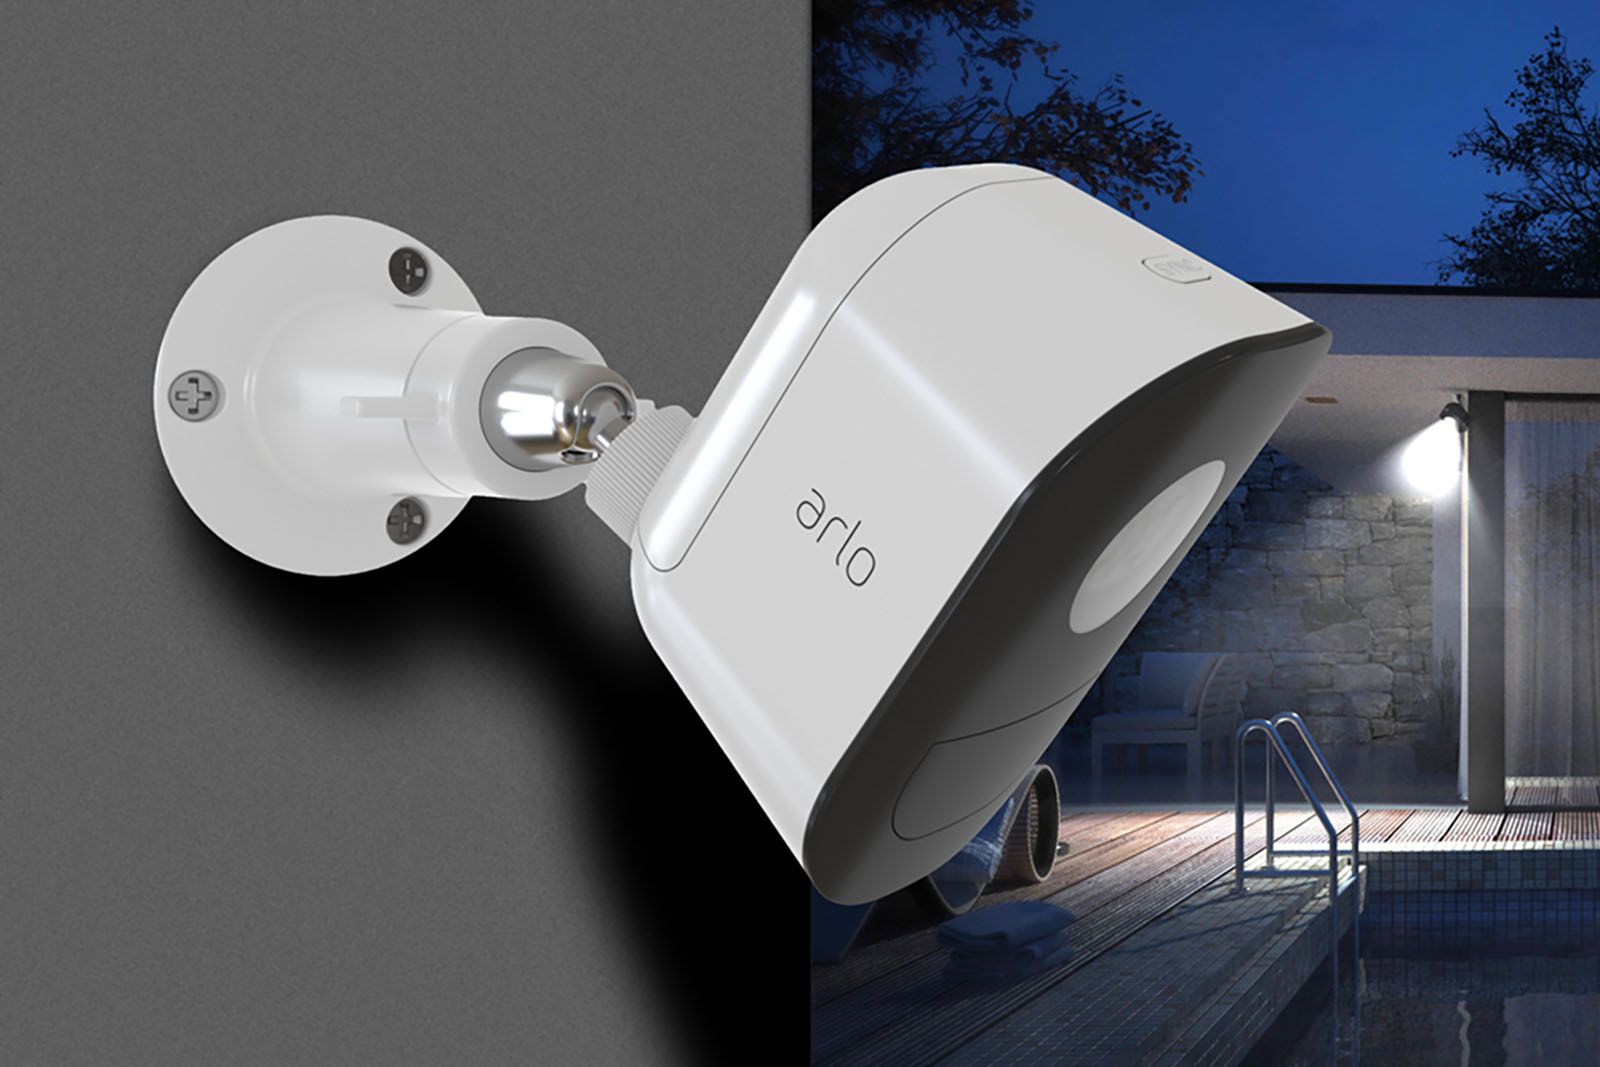 Netgear Adds A Wireless Security Light And Solar Panel To Its Arlo Lineup image 1